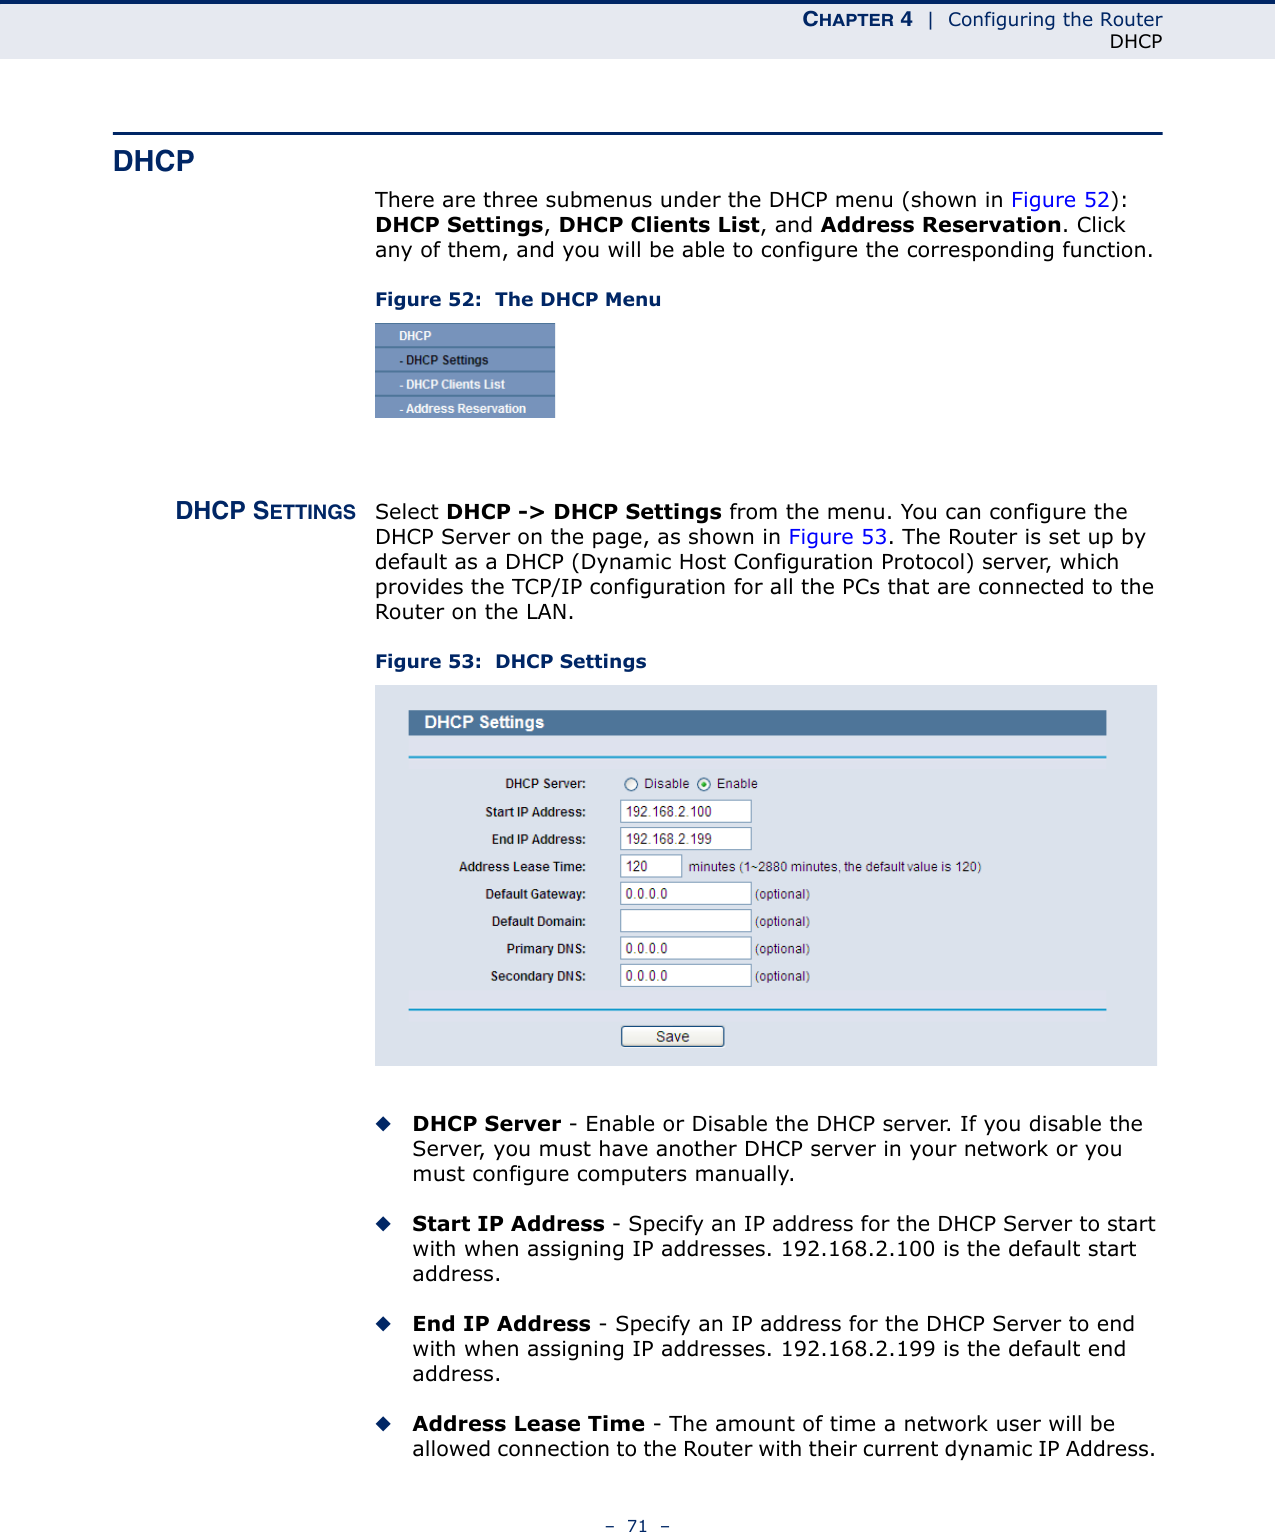 CHAPTER 4  |  Configuring the RouterDHCP–  71  –DHCPThere are three submenus under the DHCP menu (shown in Figure 52): DHCP Settings, DHCP Clients List, and Address Reservation. Click any of them, and you will be able to configure the corresponding function.Figure 52:  The DHCP MenuDHCP SETTINGS Select DHCP -&gt; DHCP Settings from the menu. You can configure the DHCP Server on the page, as shown in Figure 53. The Router is set up by default as a DHCP (Dynamic Host Configuration Protocol) server, which provides the TCP/IP configuration for all the PCs that are connected to the Router on the LAN. Figure 53:  DHCP Settings◆DHCP Server - Enable or Disable the DHCP server. If you disable the Server, you must have another DHCP server in your network or you must configure computers manually.◆Start IP Address - Specify an IP address for the DHCP Server to start with when assigning IP addresses. 192.168.2.100 is the default start address.◆End IP Address - Specify an IP address for the DHCP Server to end with when assigning IP addresses. 192.168.2.199 is the default end address.◆Address Lease Time - The amount of time a network user will be allowed connection to the Router with their current dynamic IP Address. 